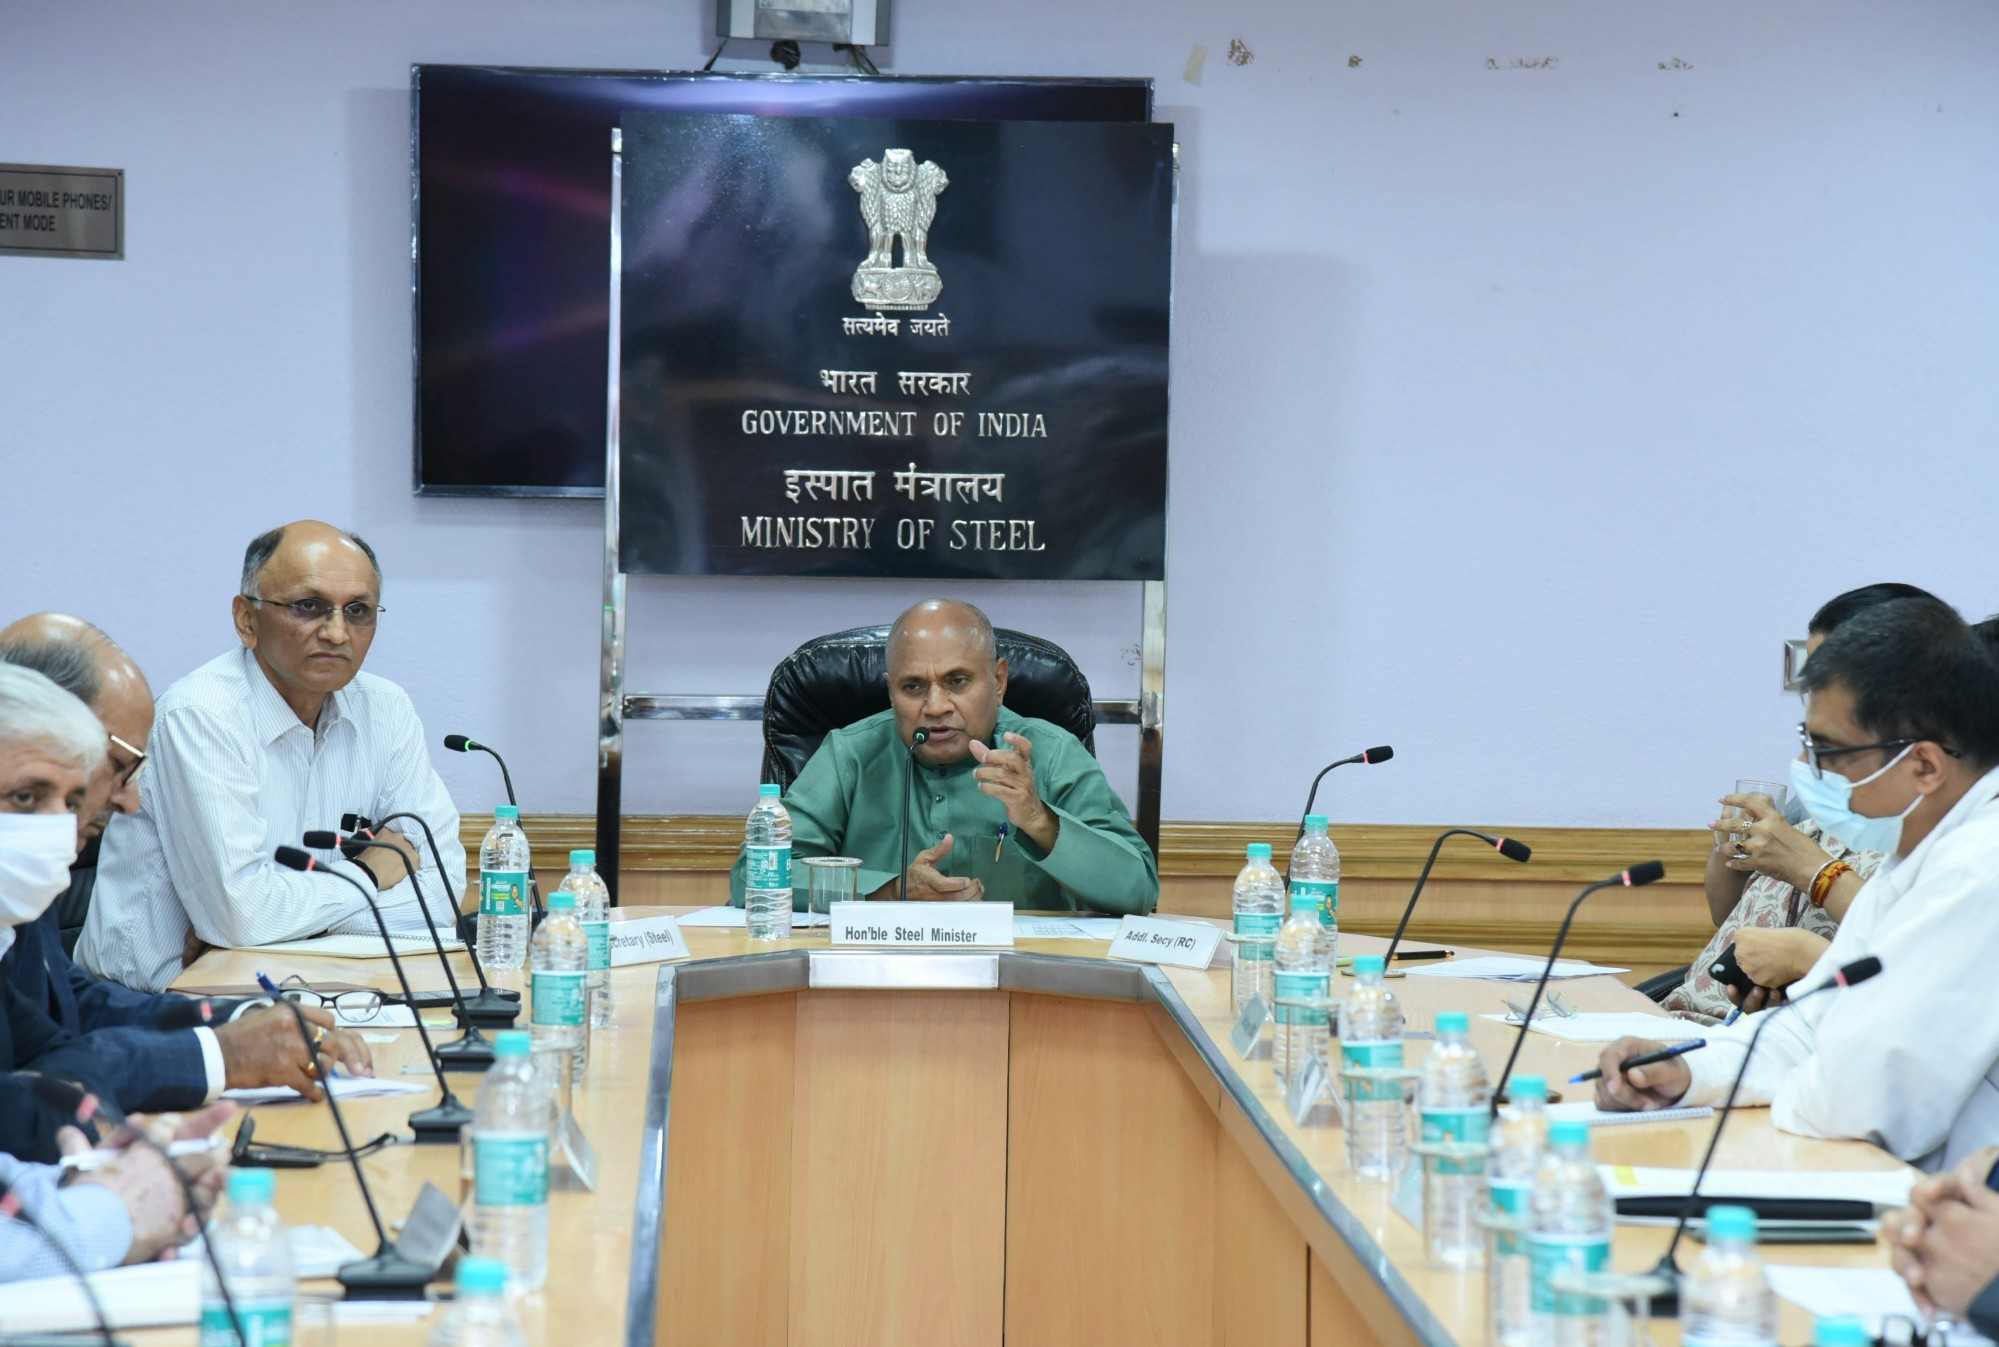 Union Steel Minister calls upon the Private Steel Sector Companies to contribute towards the Target of 500 Million Tonnes of Green and Clean Steel Capacity in the Country in the 25 Years of the Immortal Period